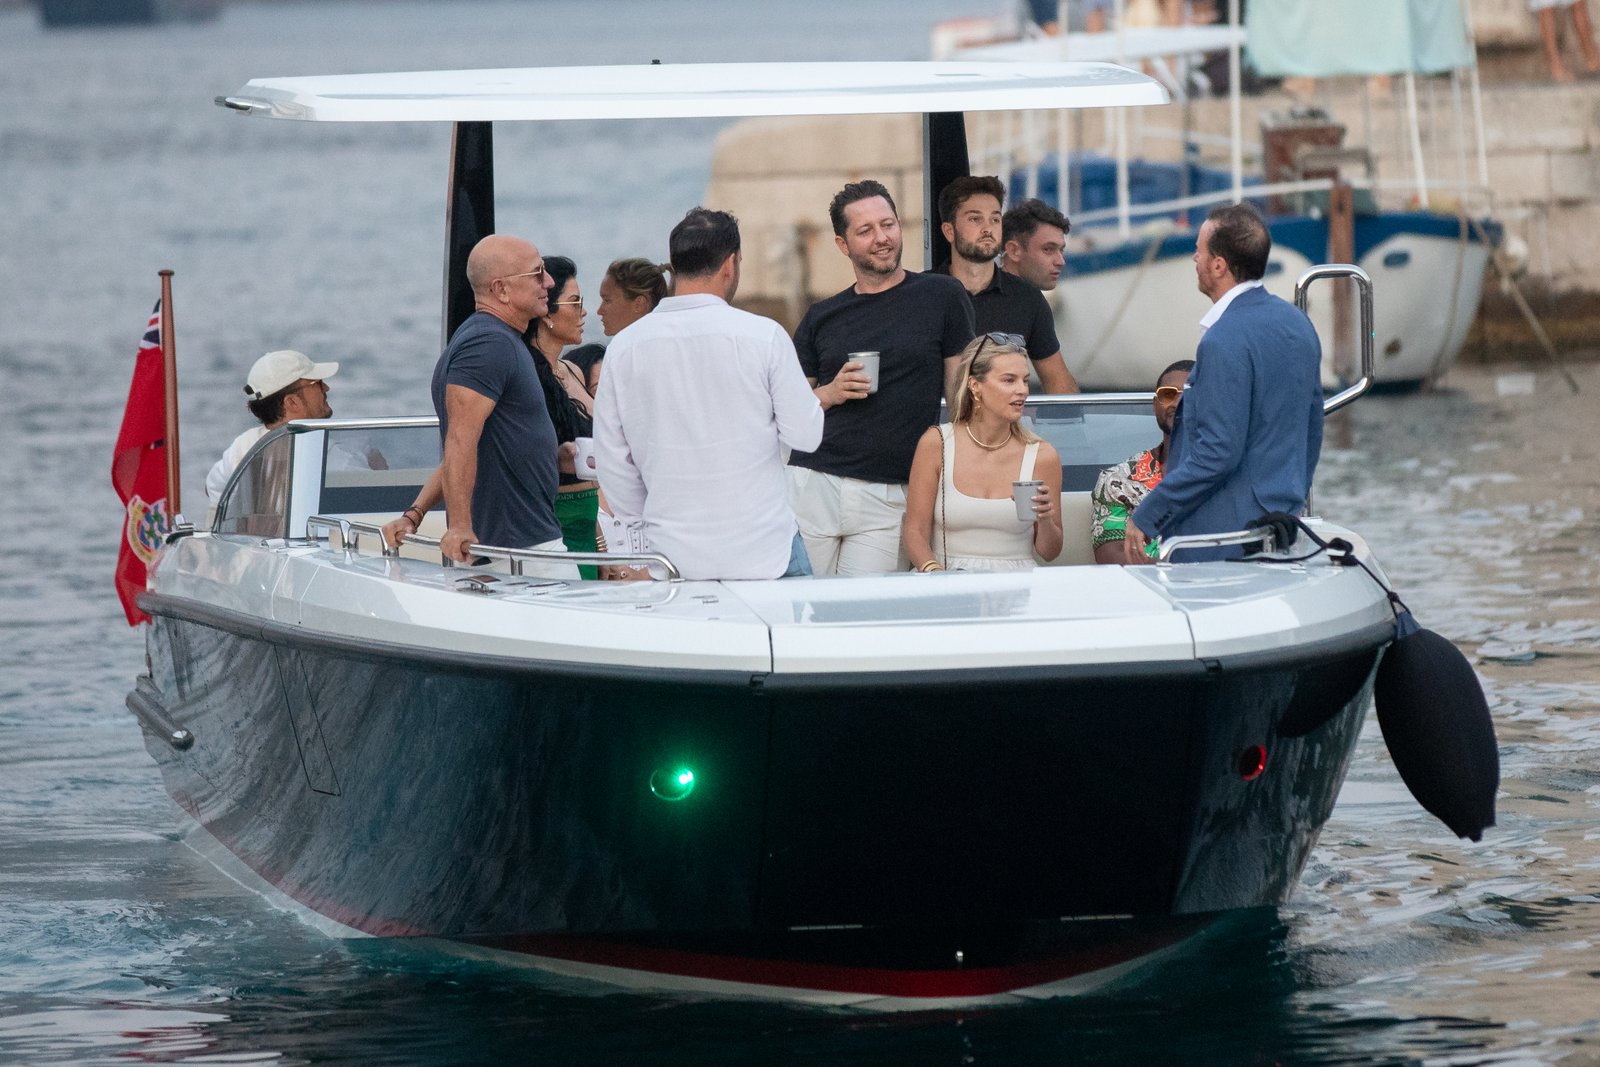 Katy Perry, Orlando Bloom and Jeff Bezos on a boat